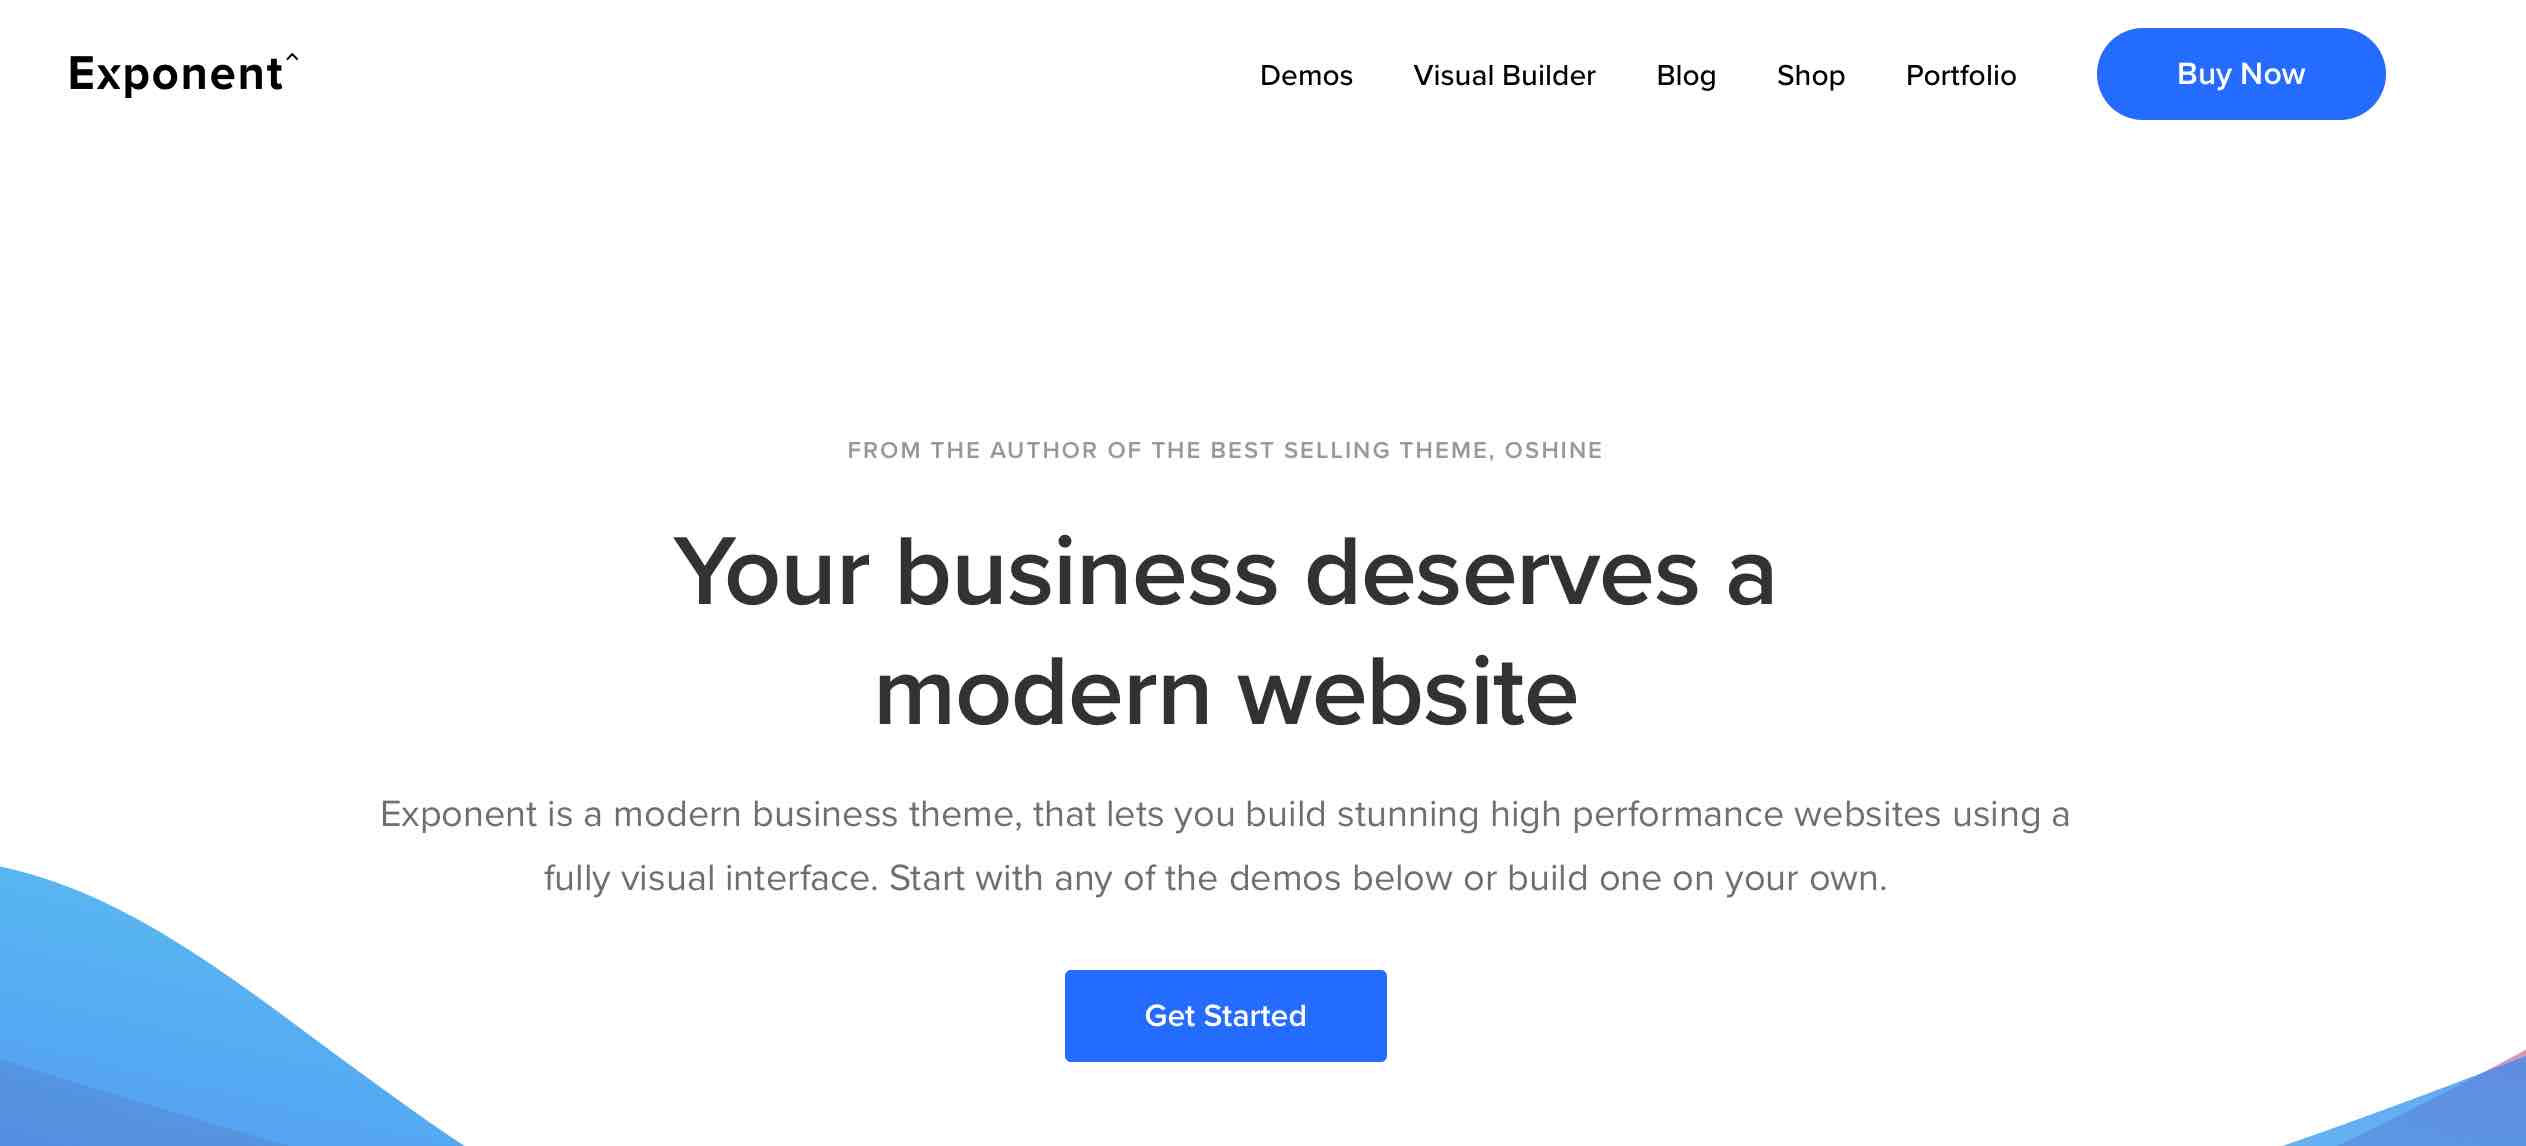 Exponent business theme